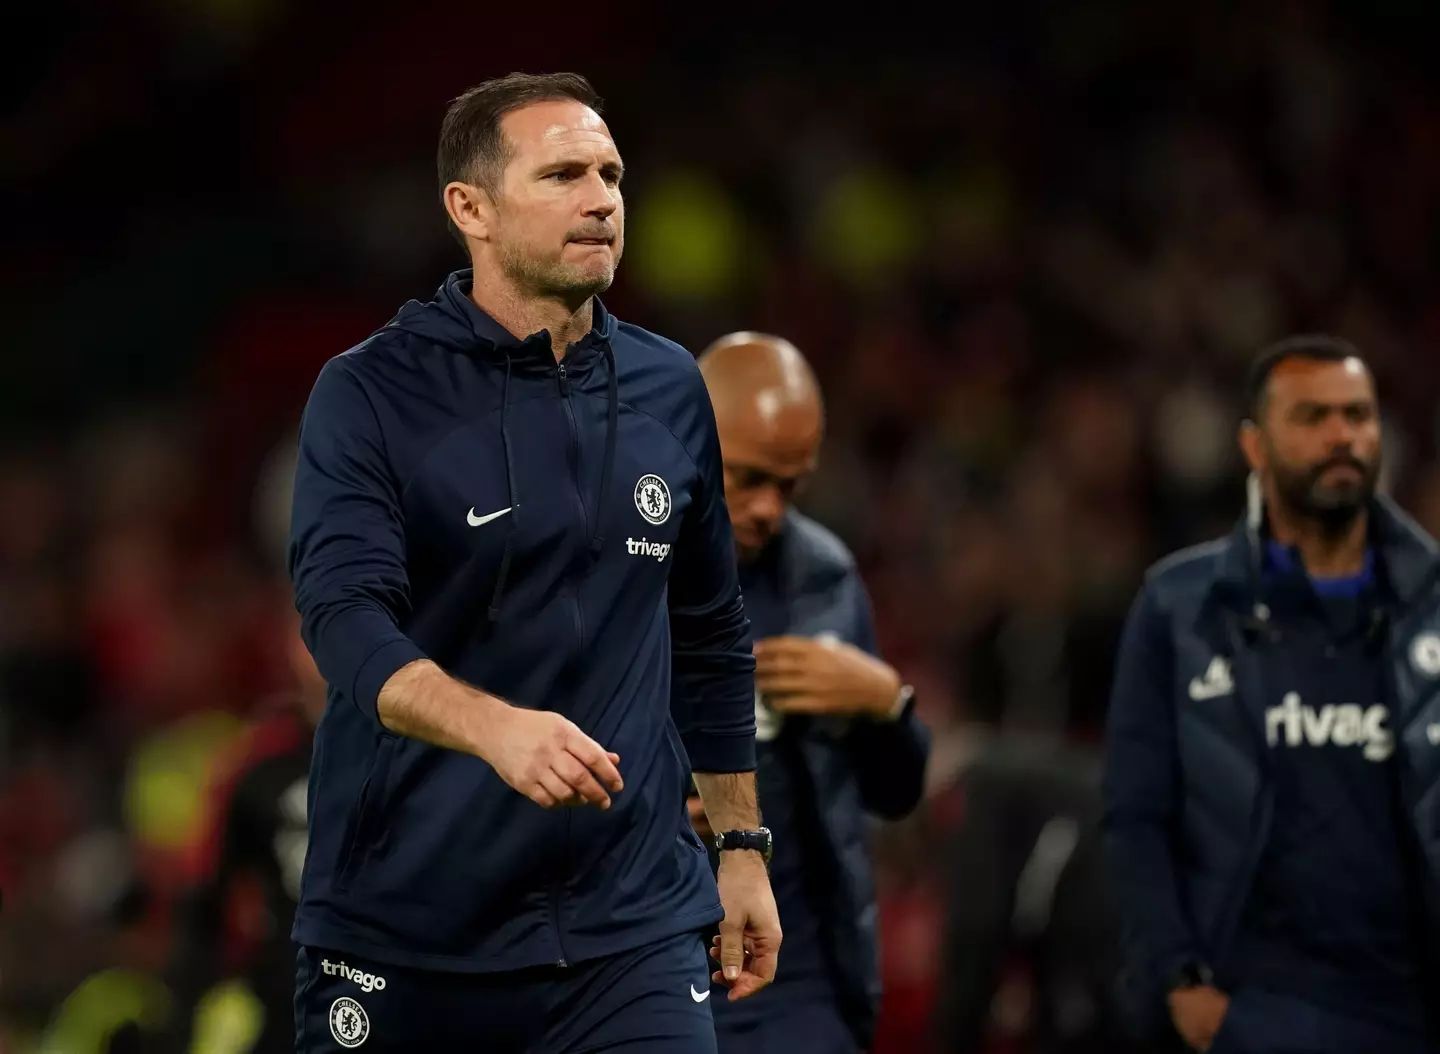 It was another tough night for Lampard. Image: Alamy